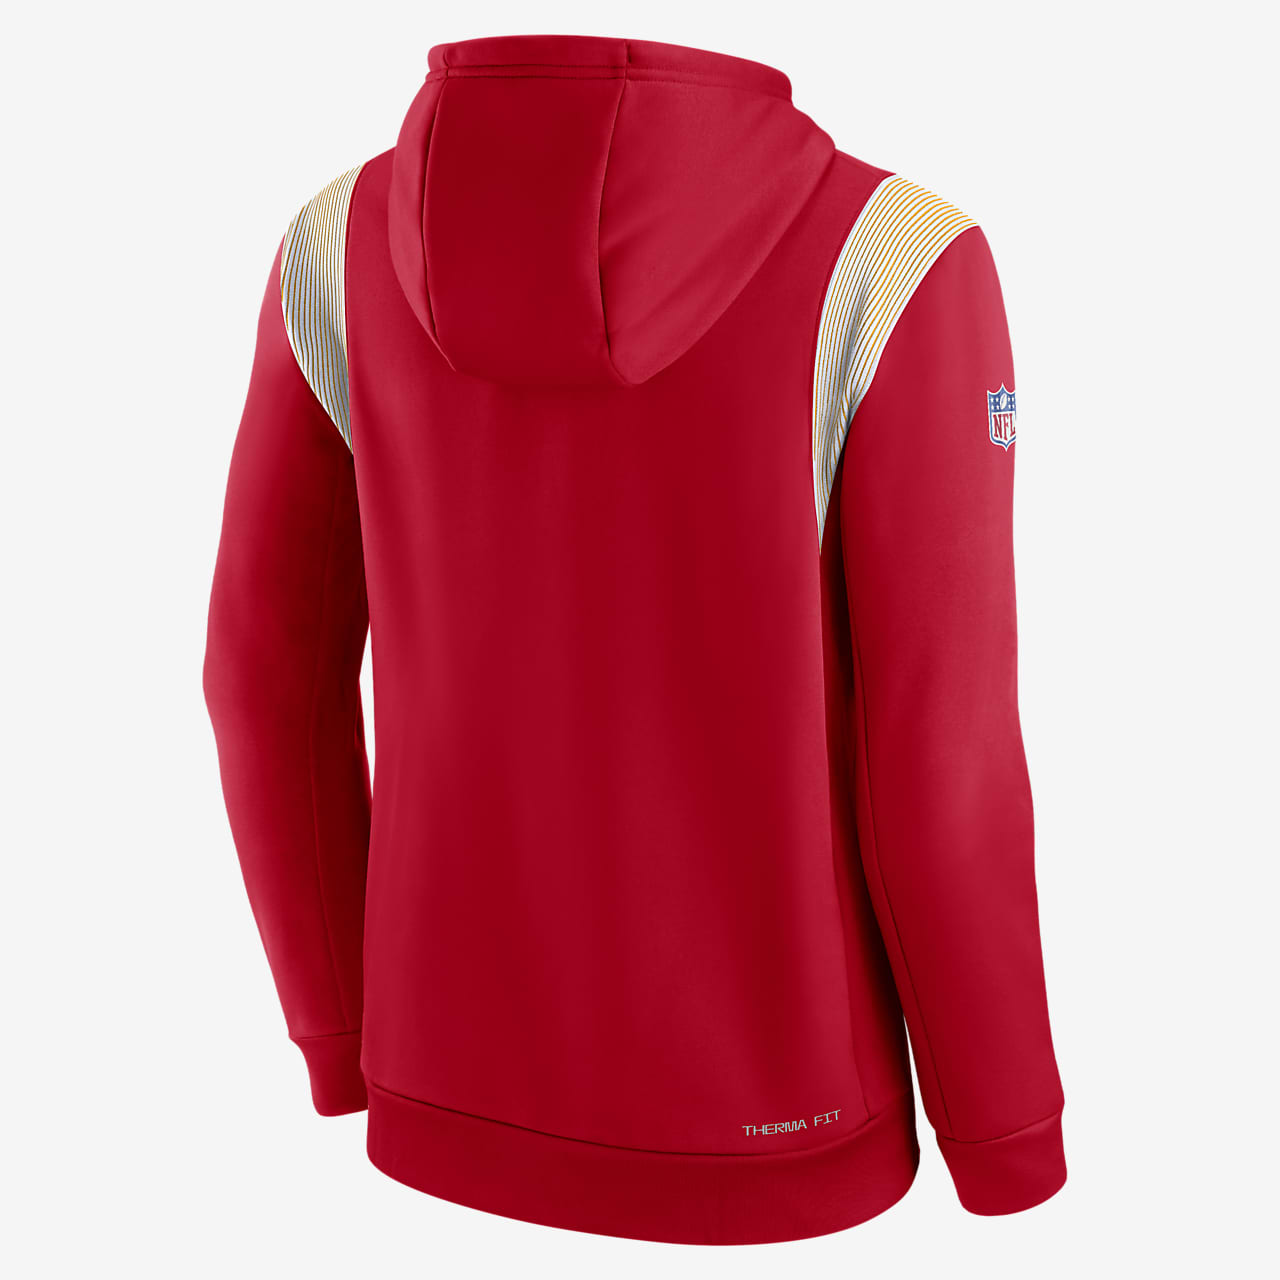 chiefs therma hoodie